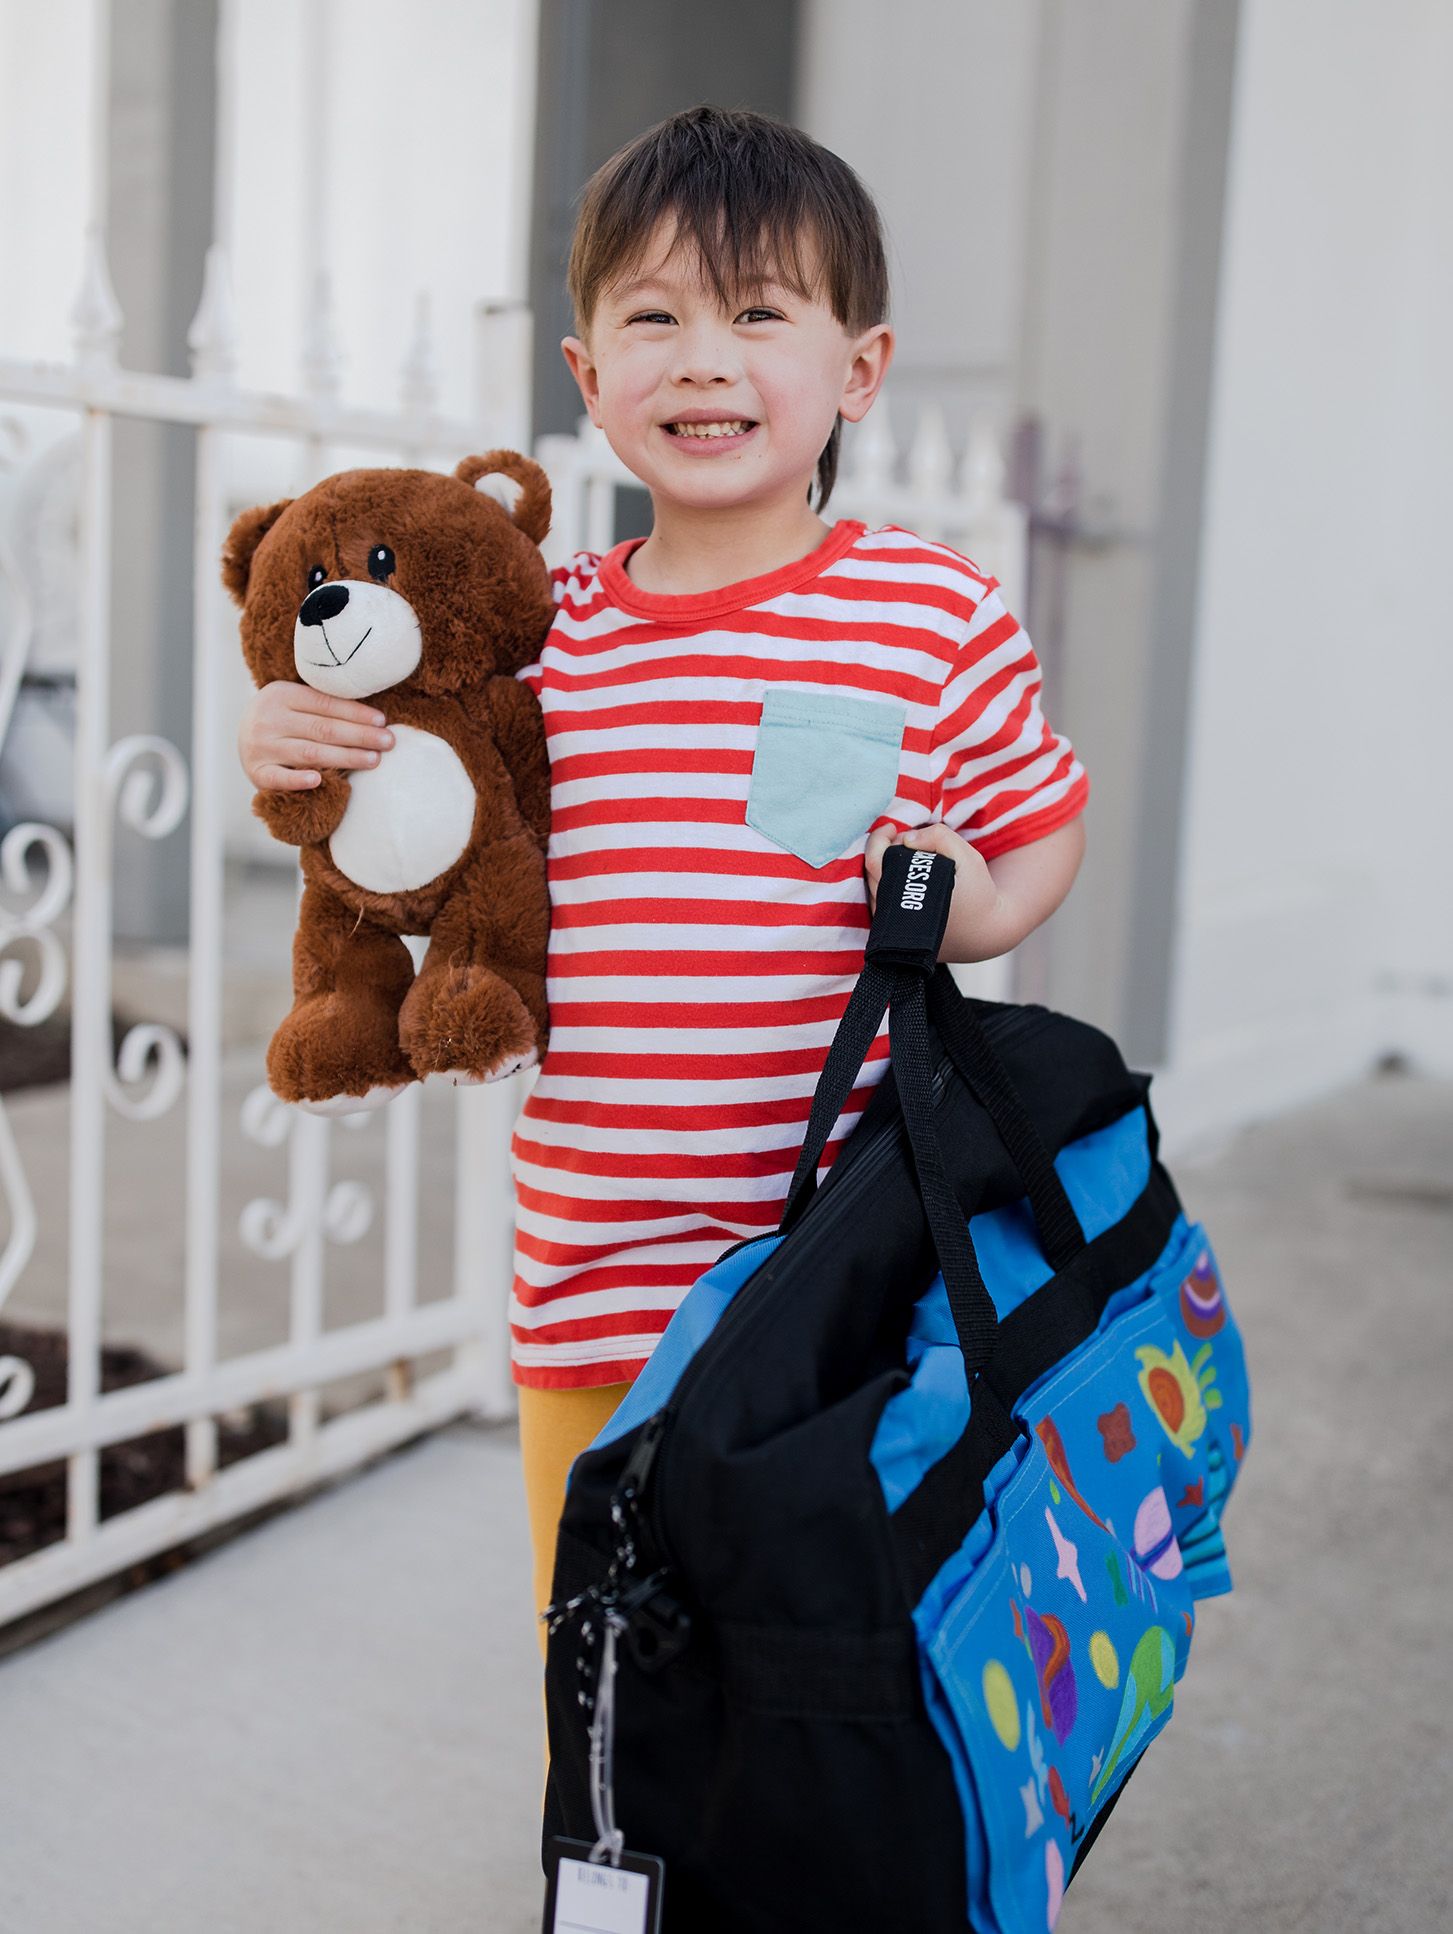 Little boy holding a teddy bear and sweetcase